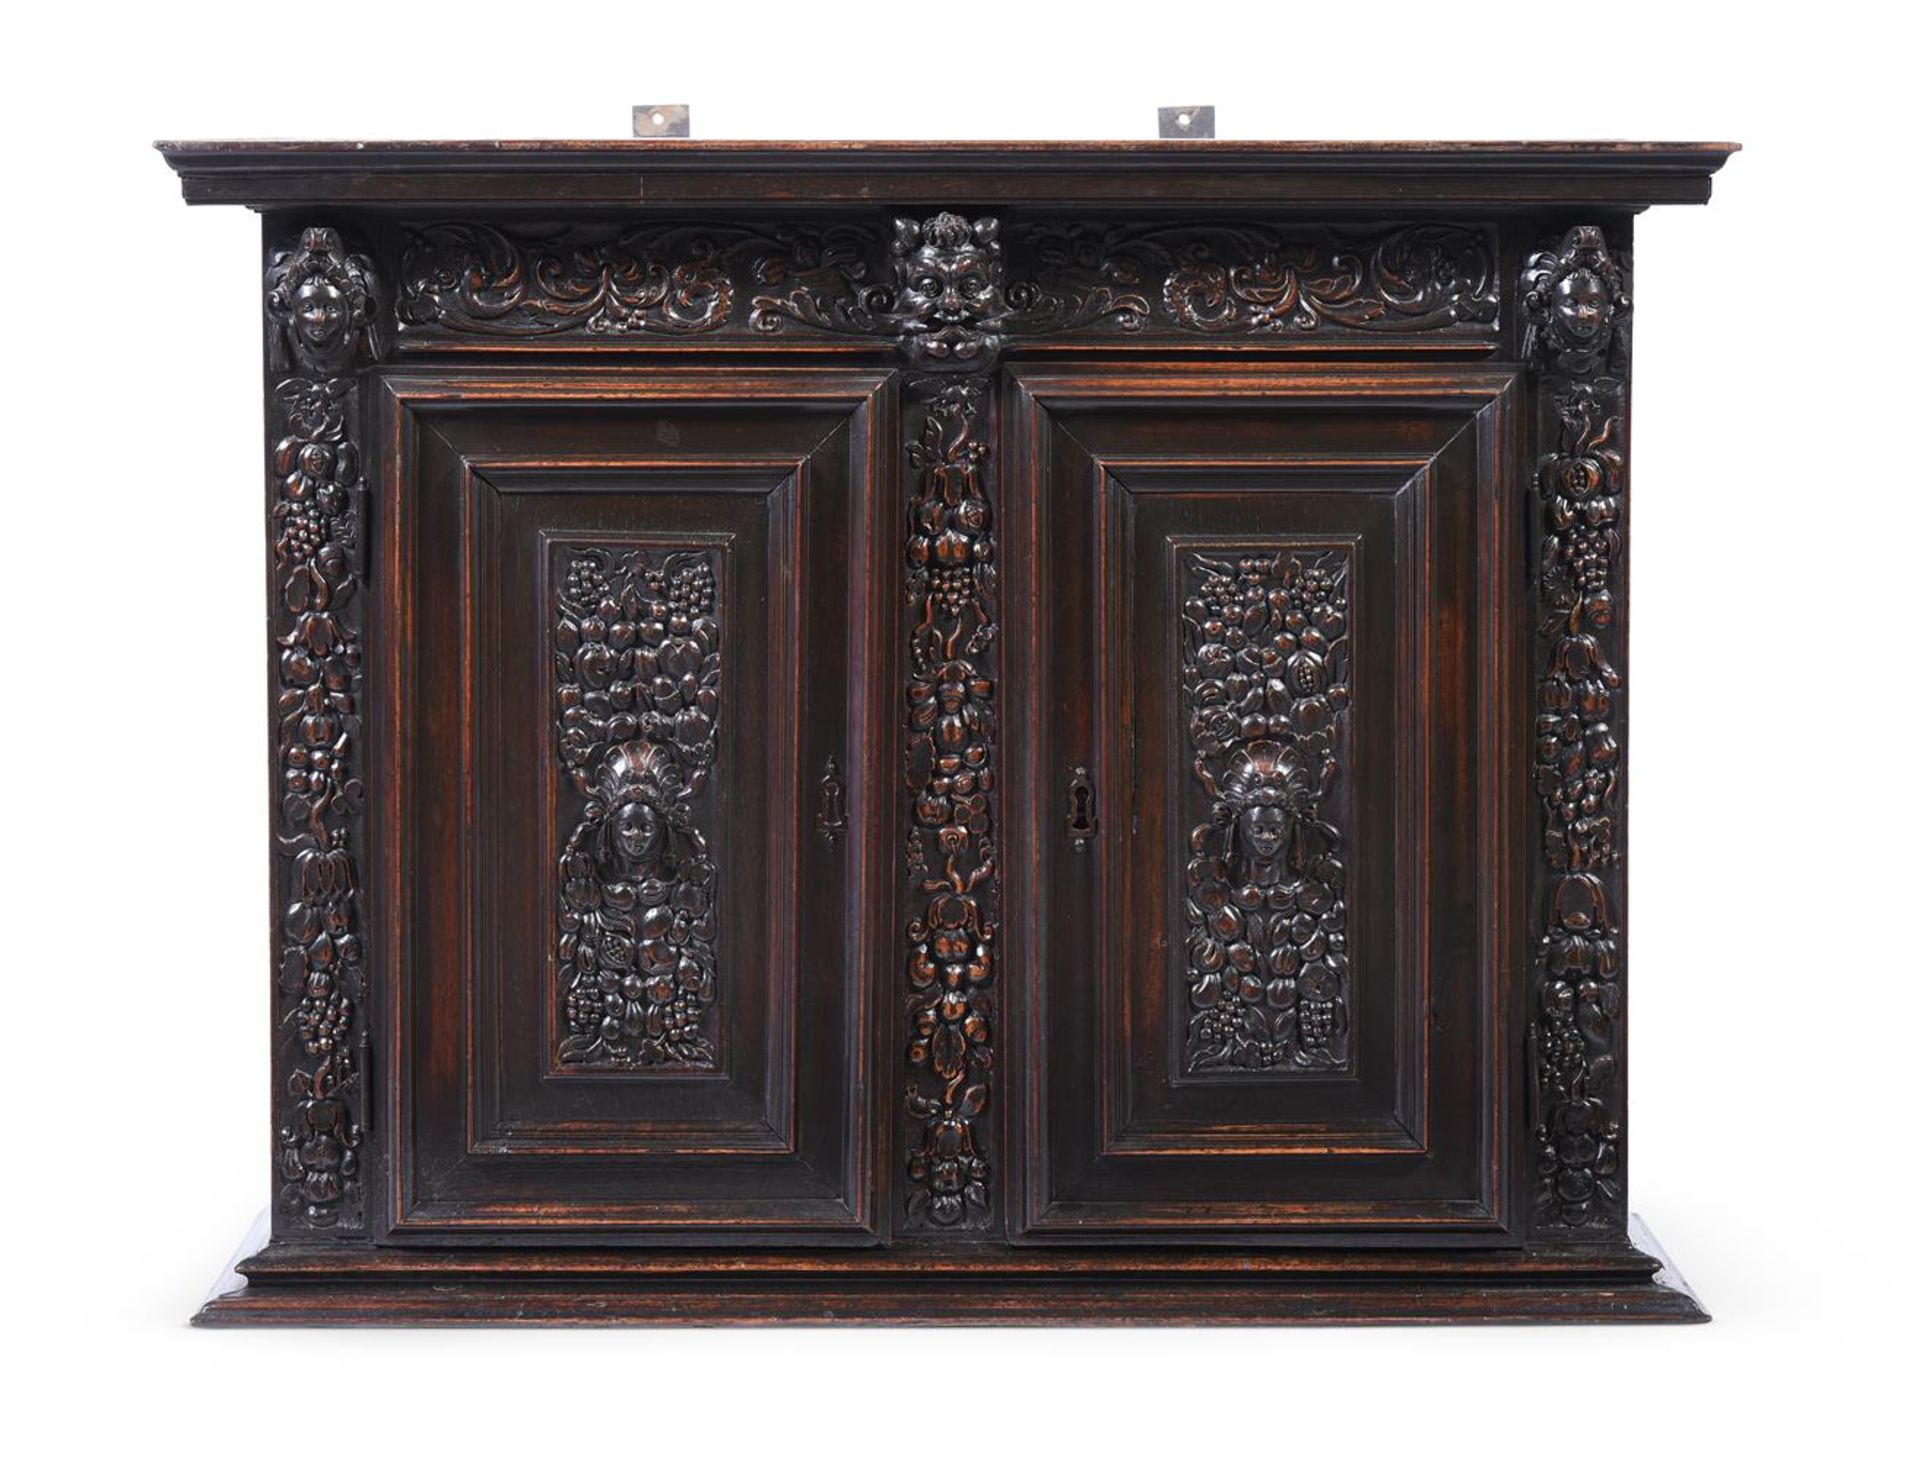 A FRENCH CARVED WALNUT CABINET, 16TH OR 17TH CENTURY